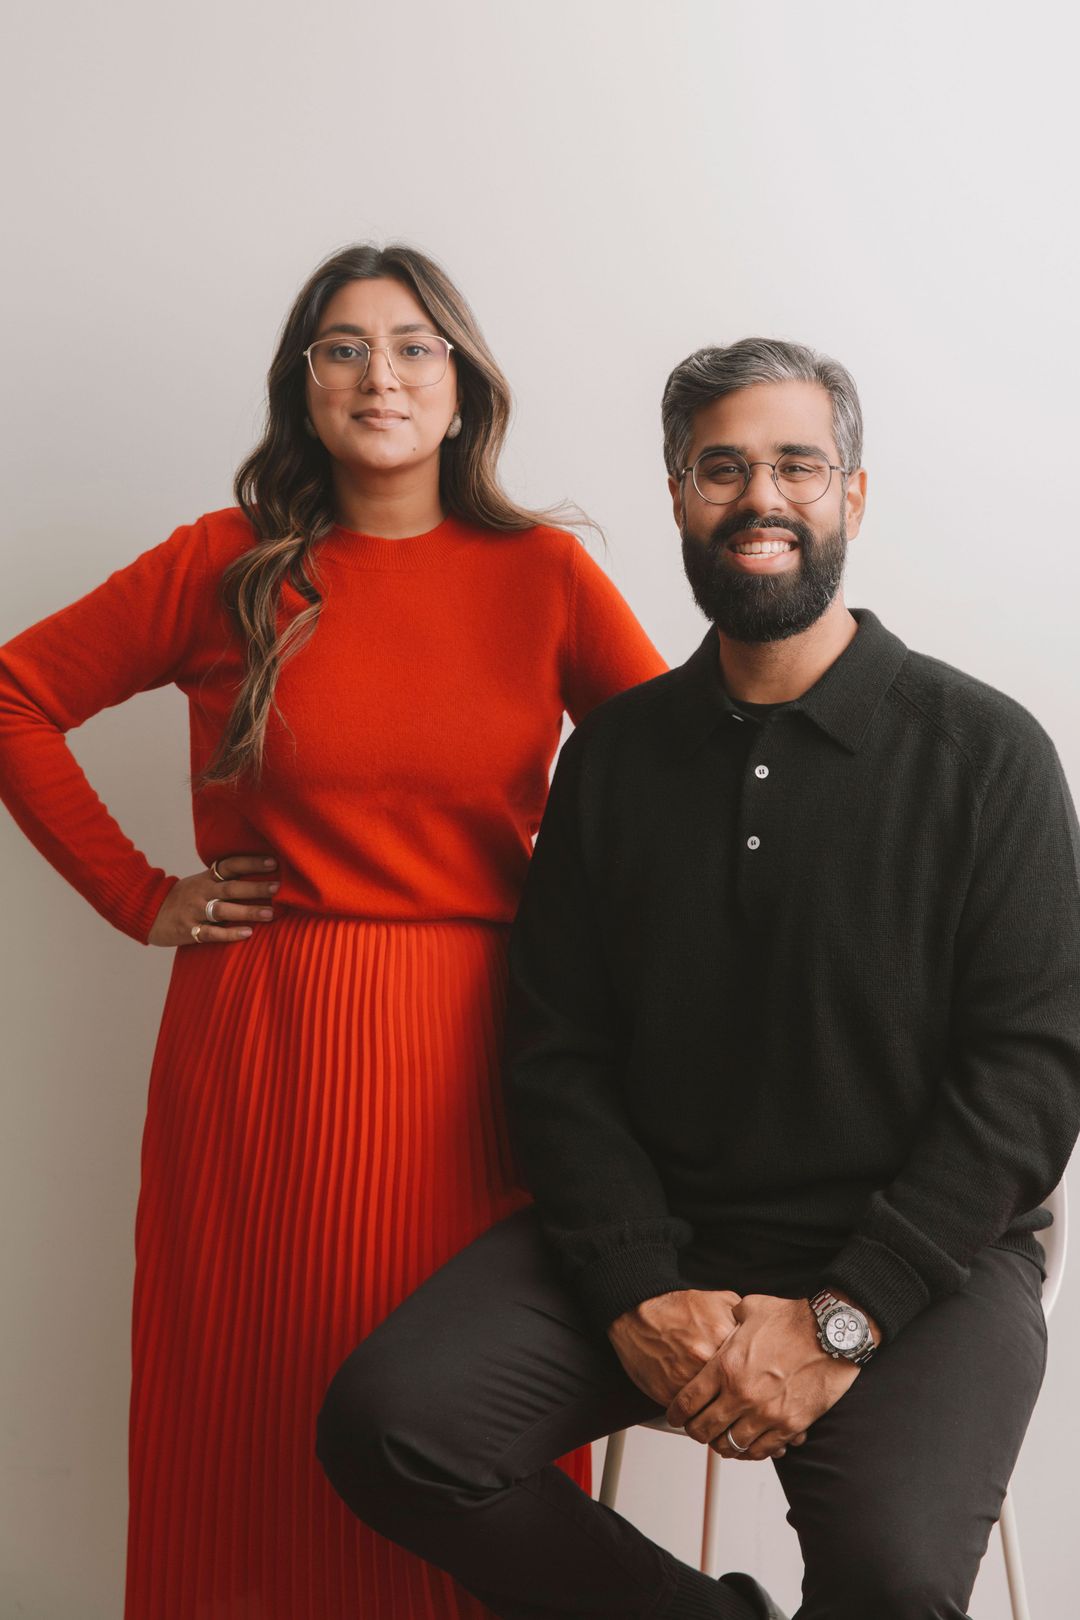 Arati Sharma standing with her hair down and wearing a red sweater and dress. She is standing behind Satish Kanwar, who is sitting on a stool and dressed all in black.